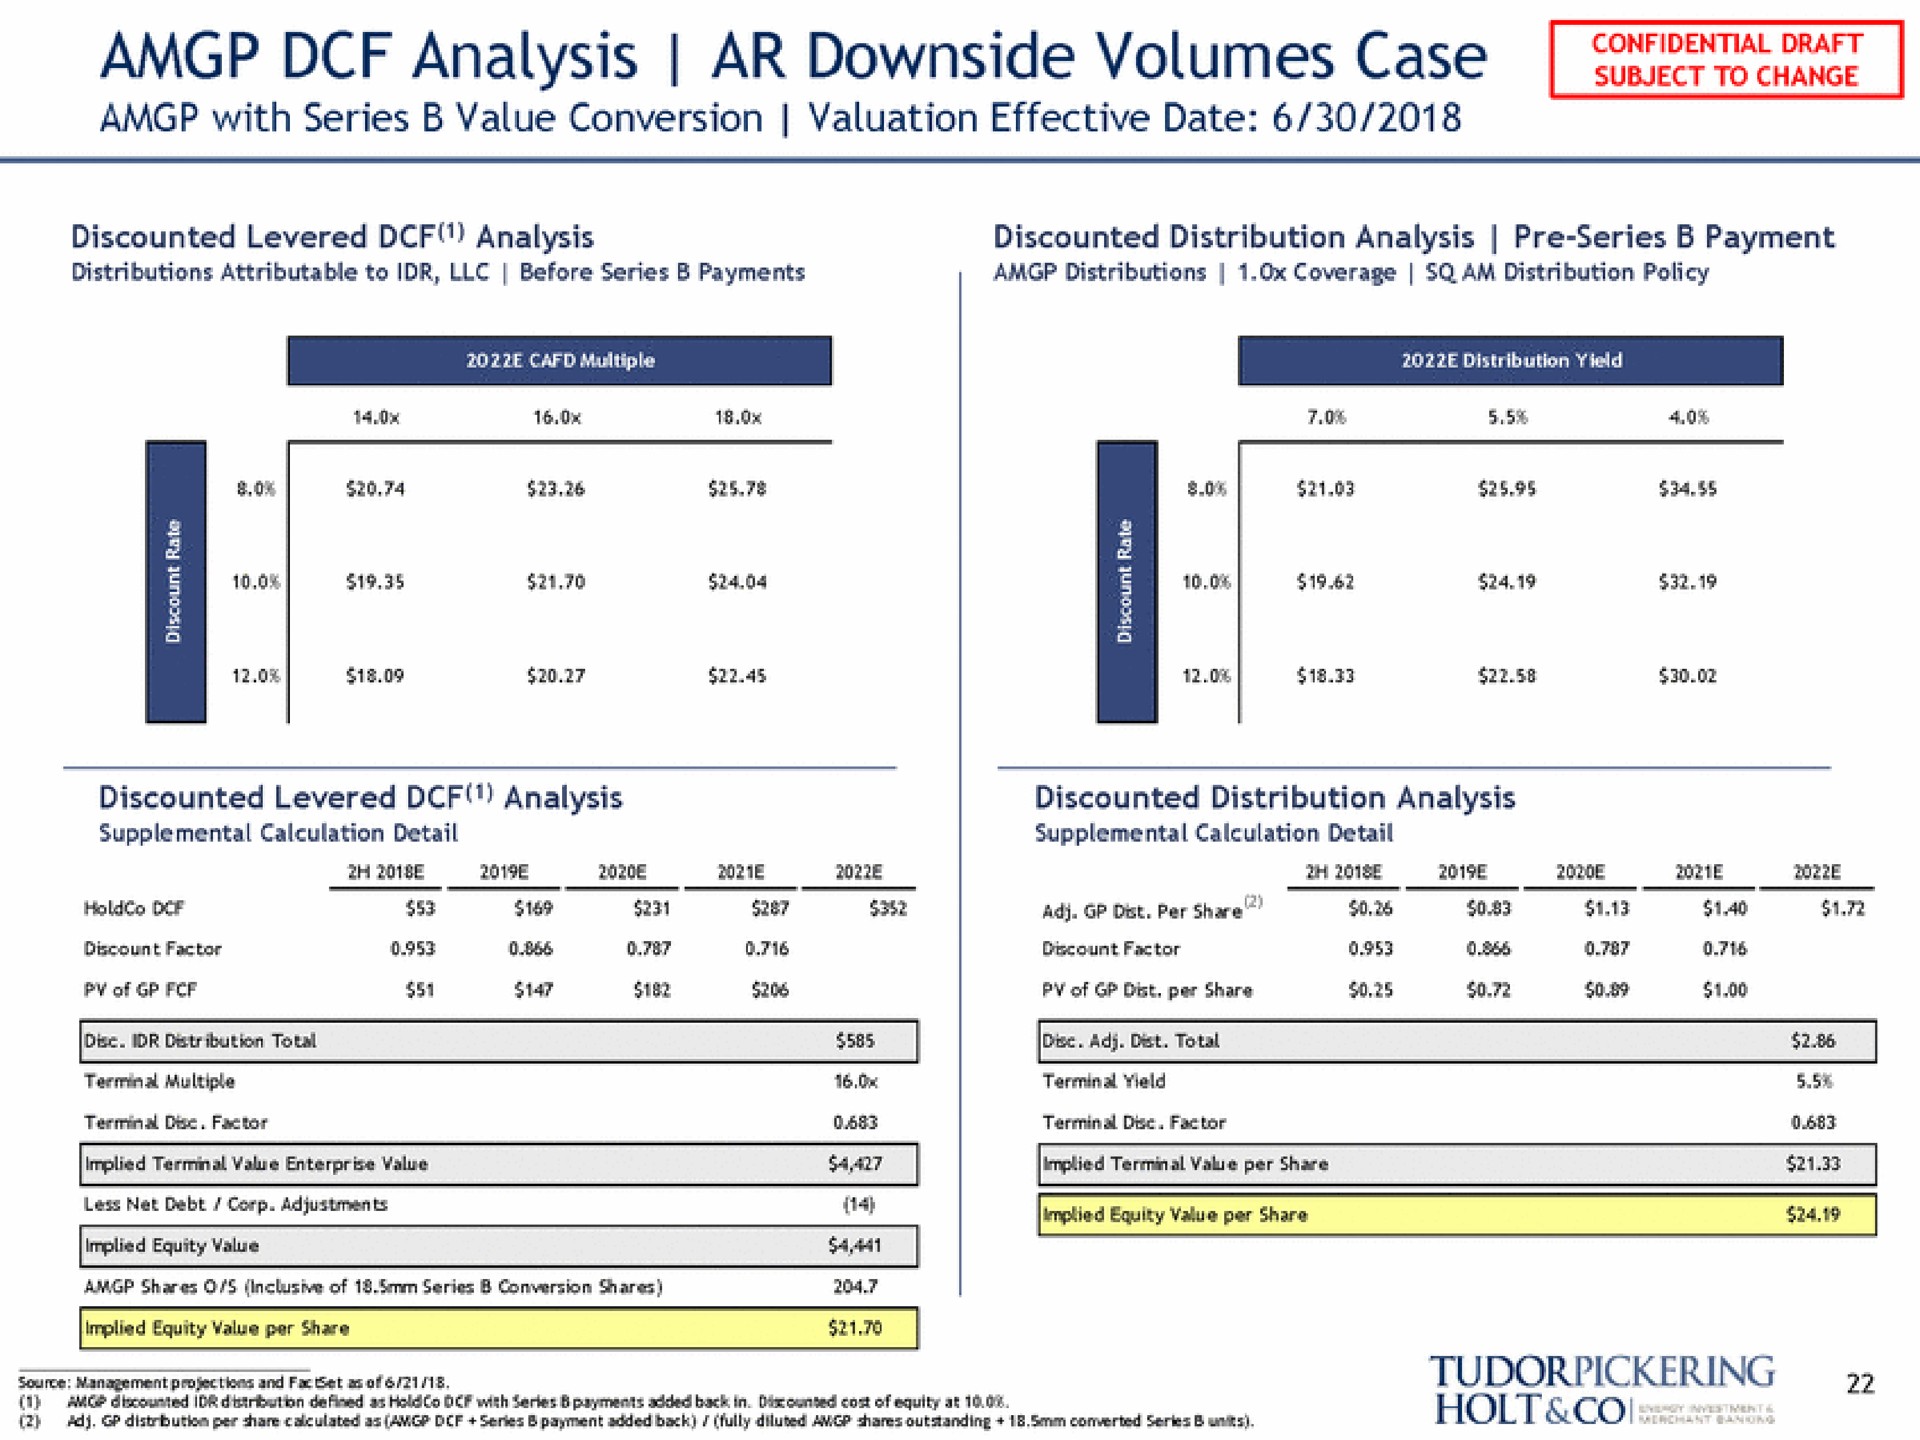 analysis downside volumes case subject to change | Tudor, Pickering, Holt & Co